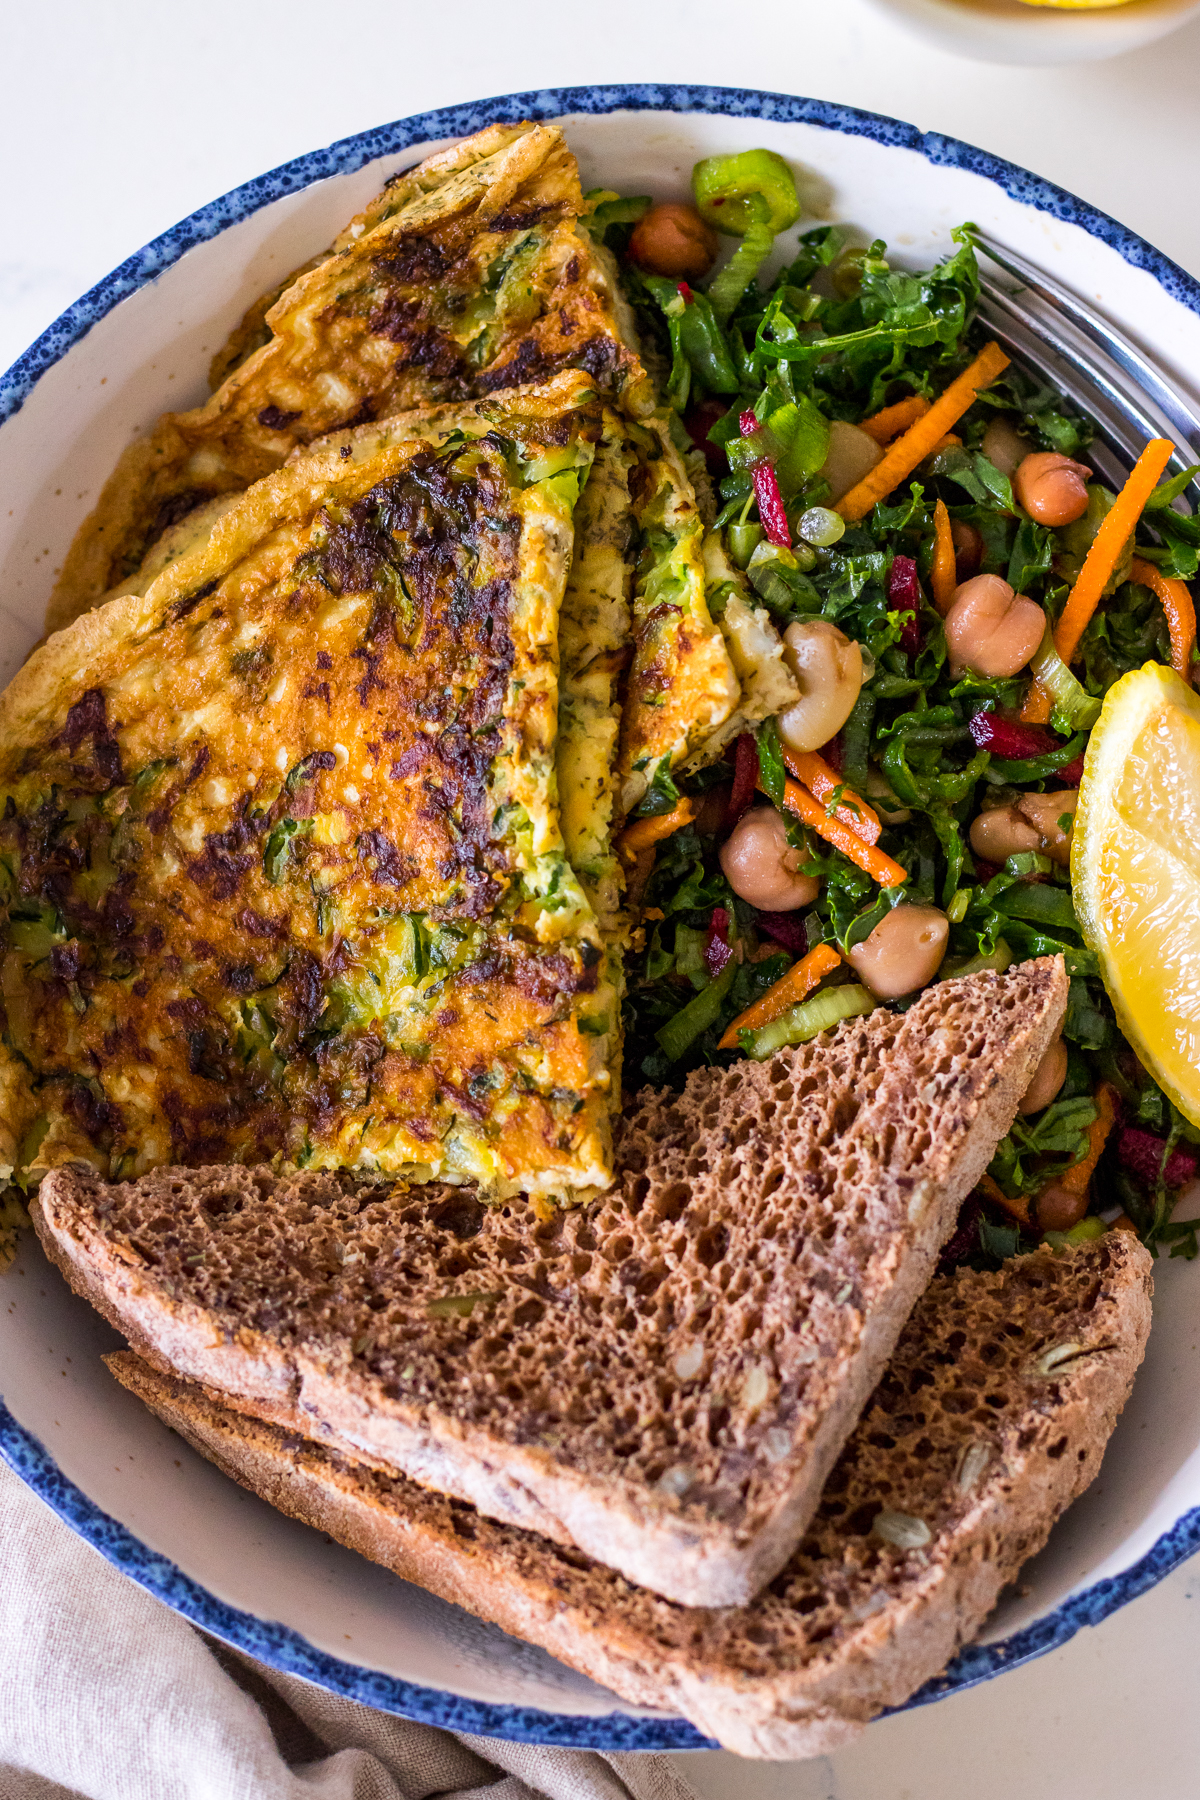 Zucchini omelette with dried herbs in a white bowl with kale slaw and brown seeded toast